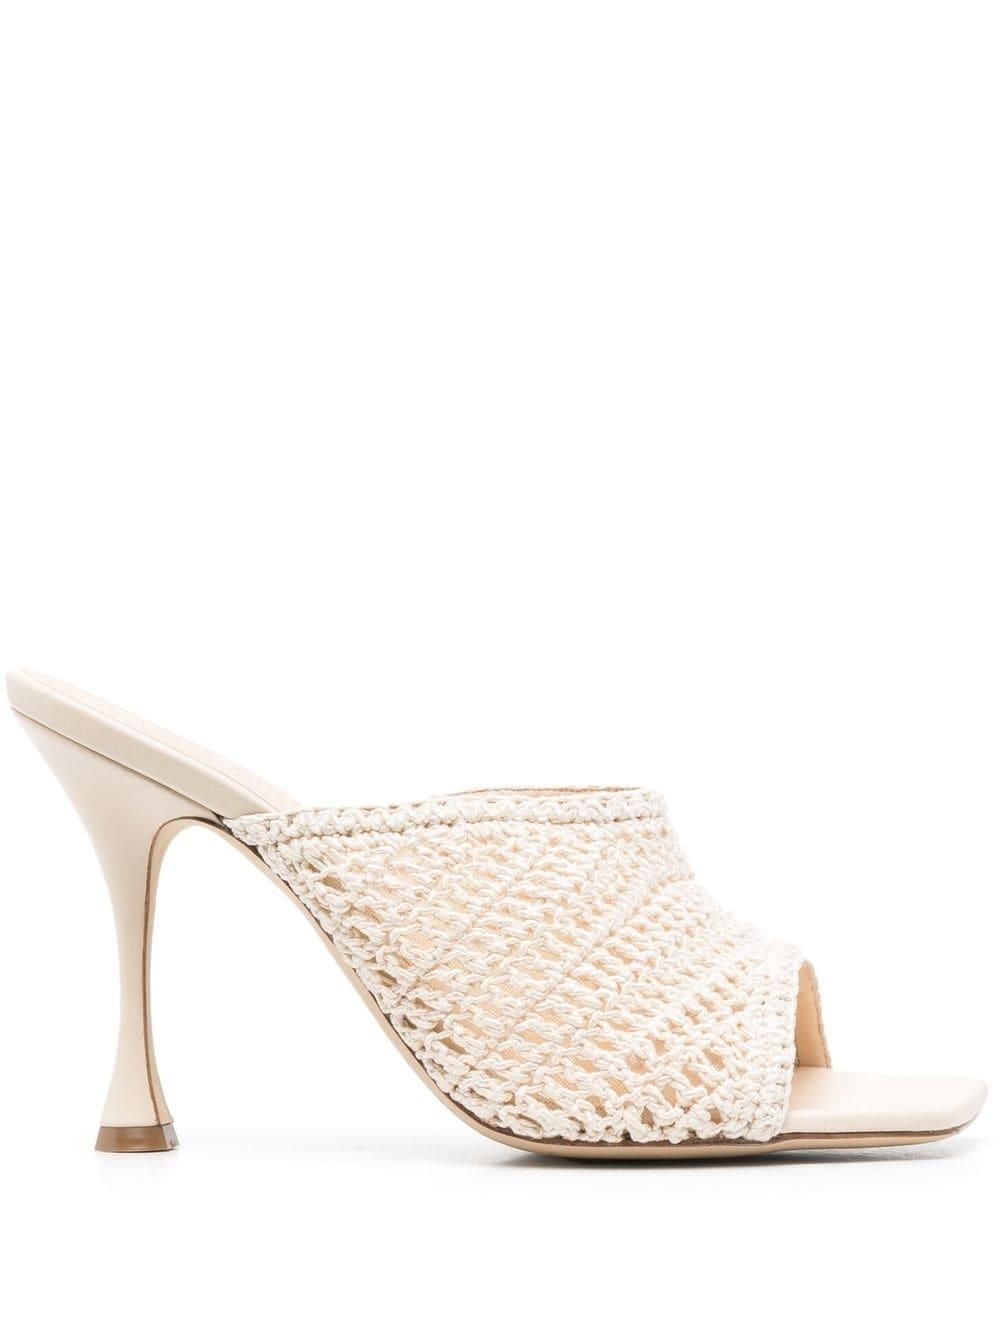 Magda Butrym 100mm Crochet Mules in Natural | Lyst